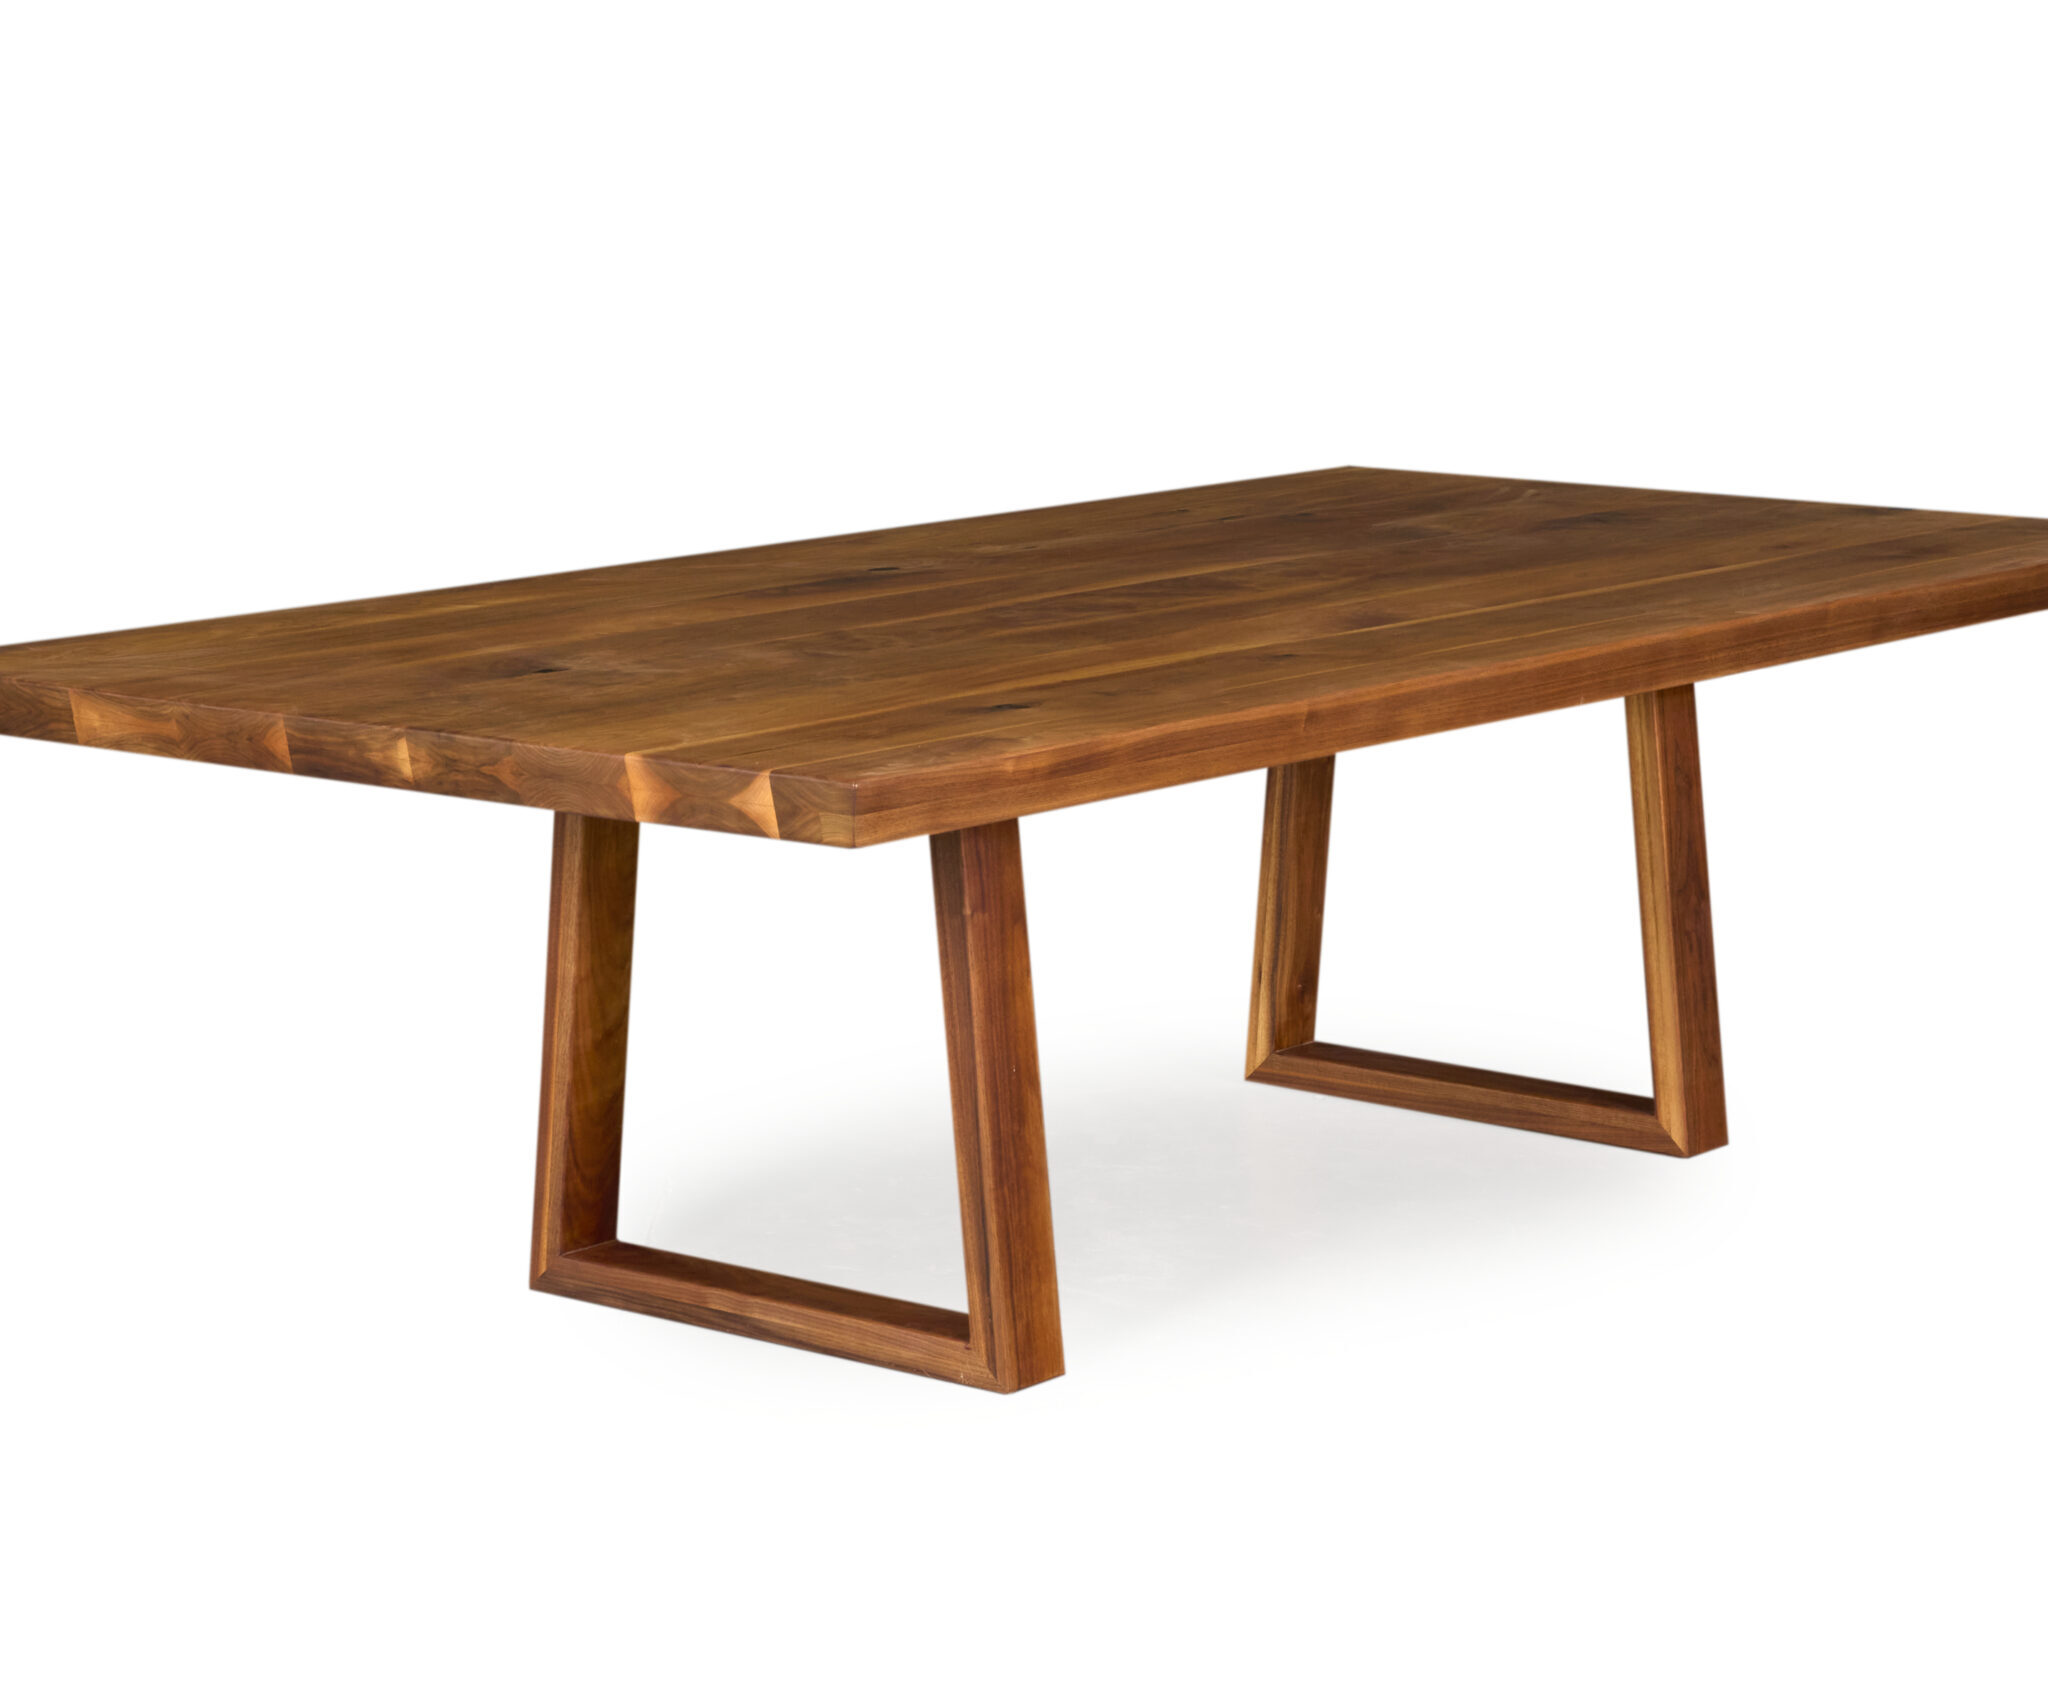 Image of Darling Point Dining table by Arranmore